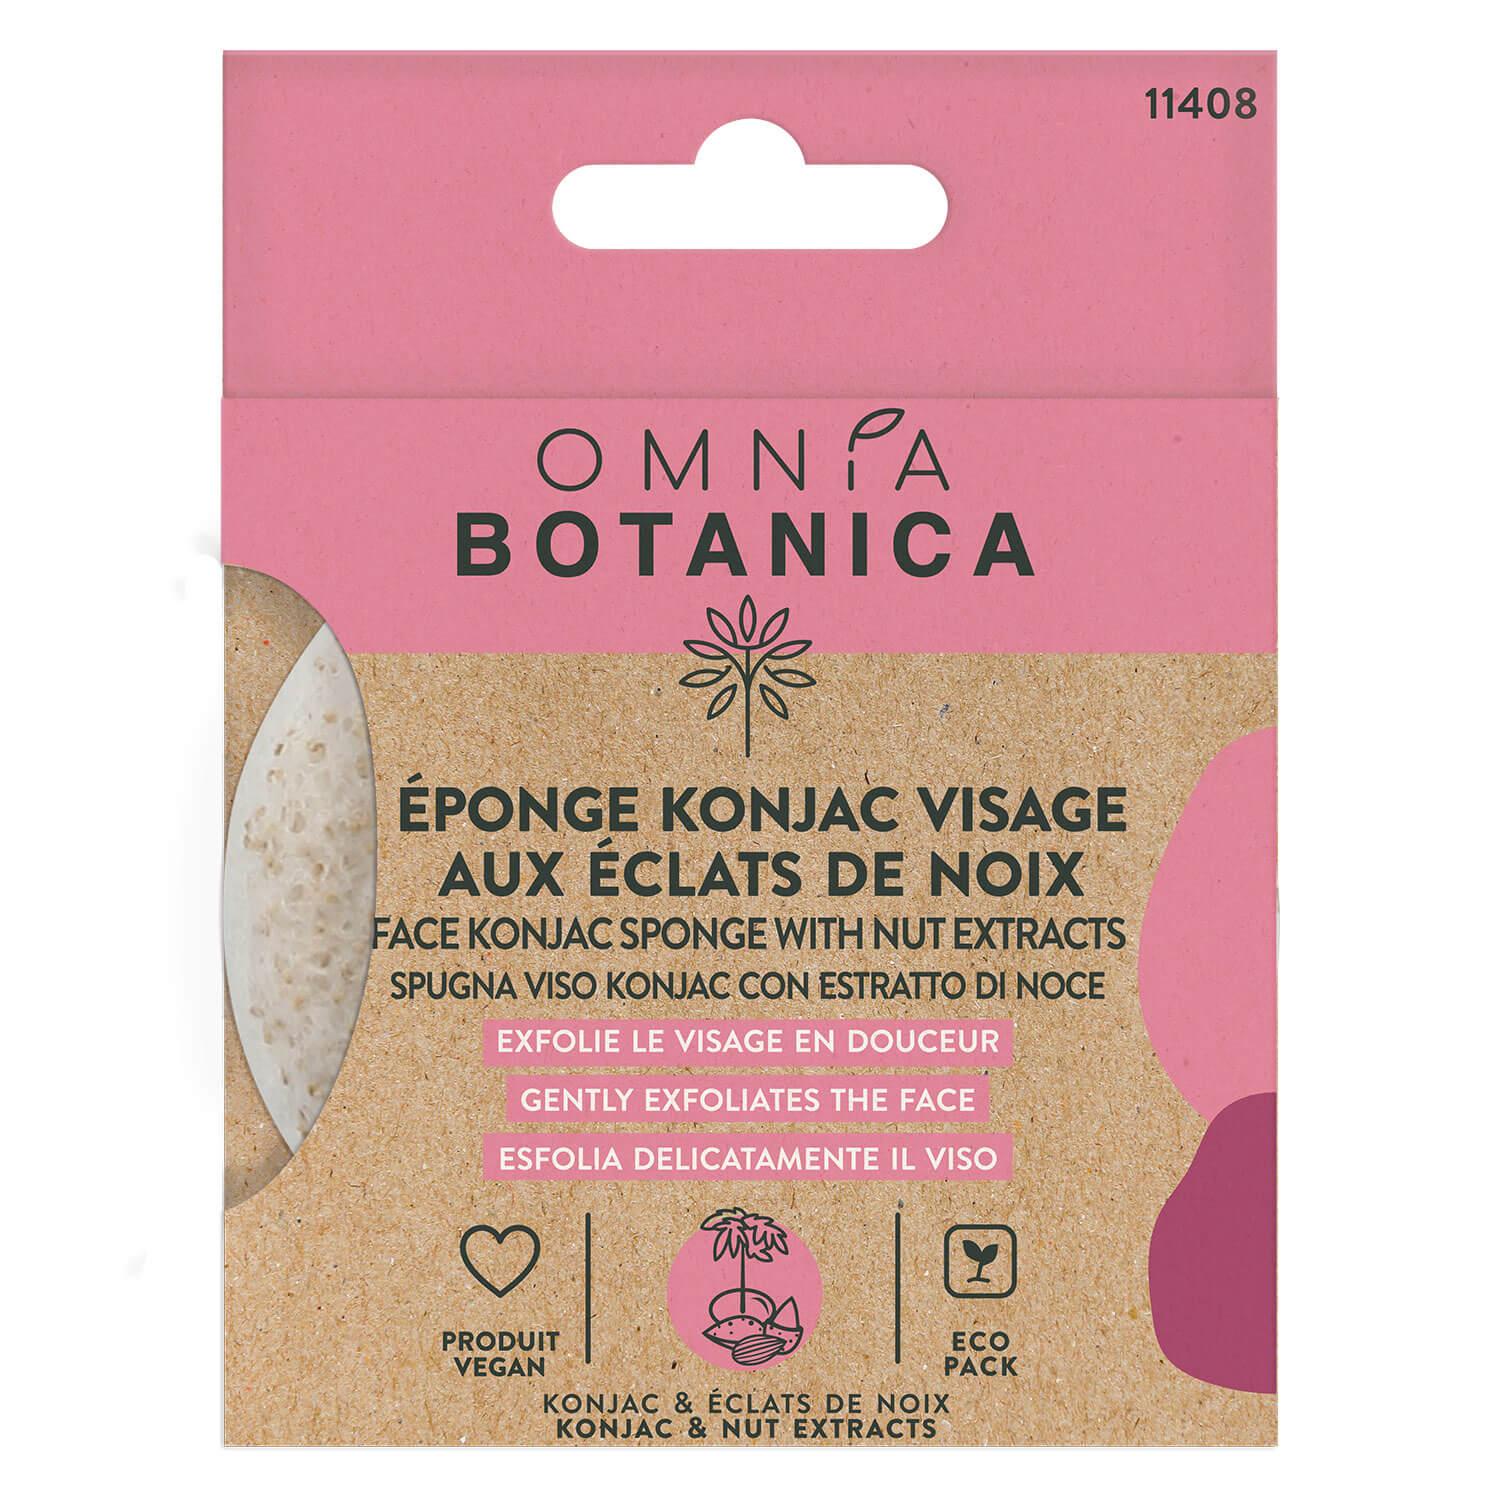 OMNIA BOTANICA - Konjac face sponge with nut extracts 